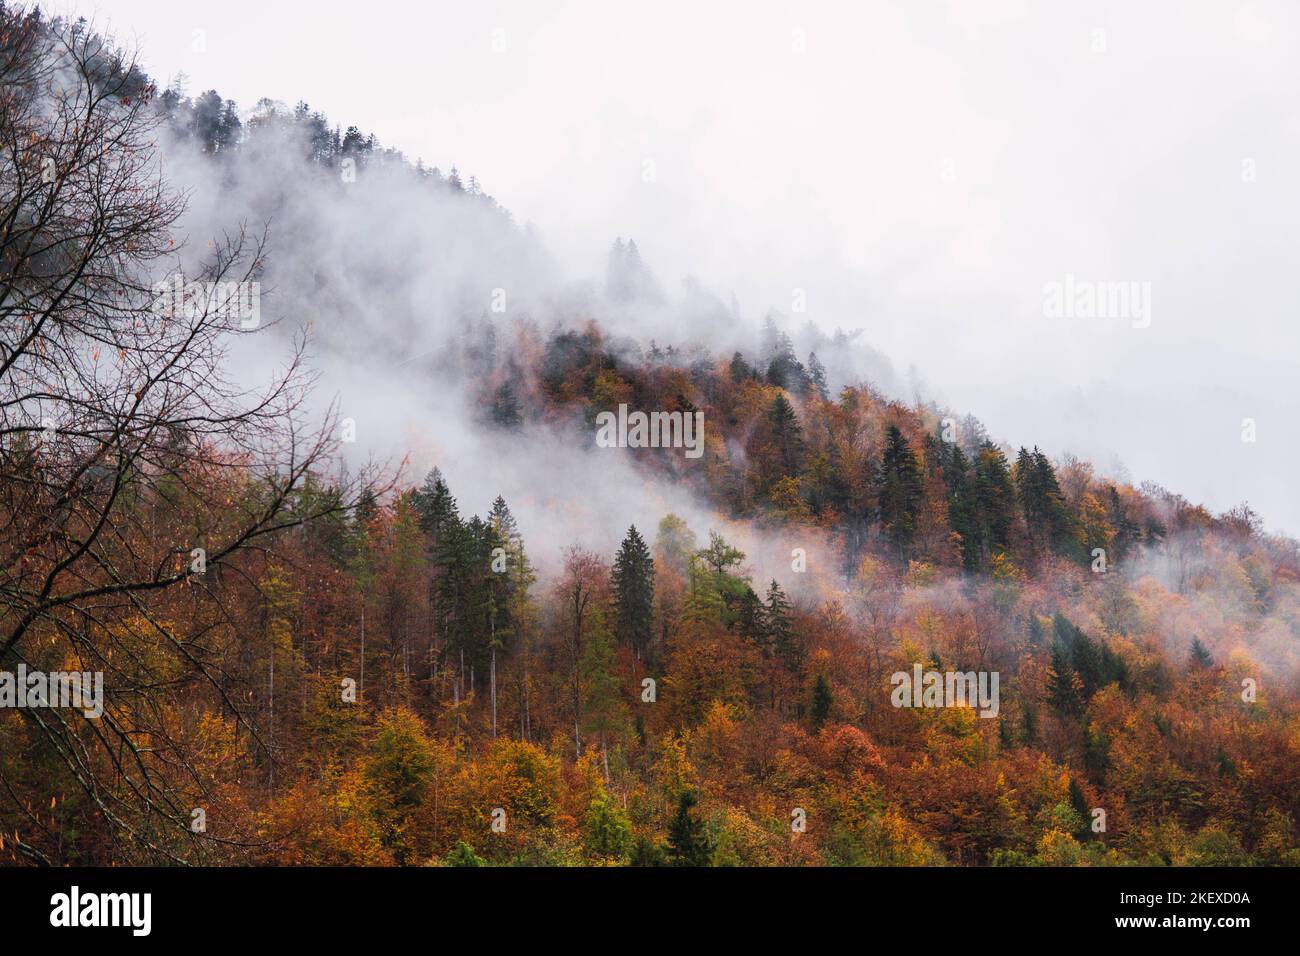 mountain with forest, brown trees in autumn with clouds Stock Photo